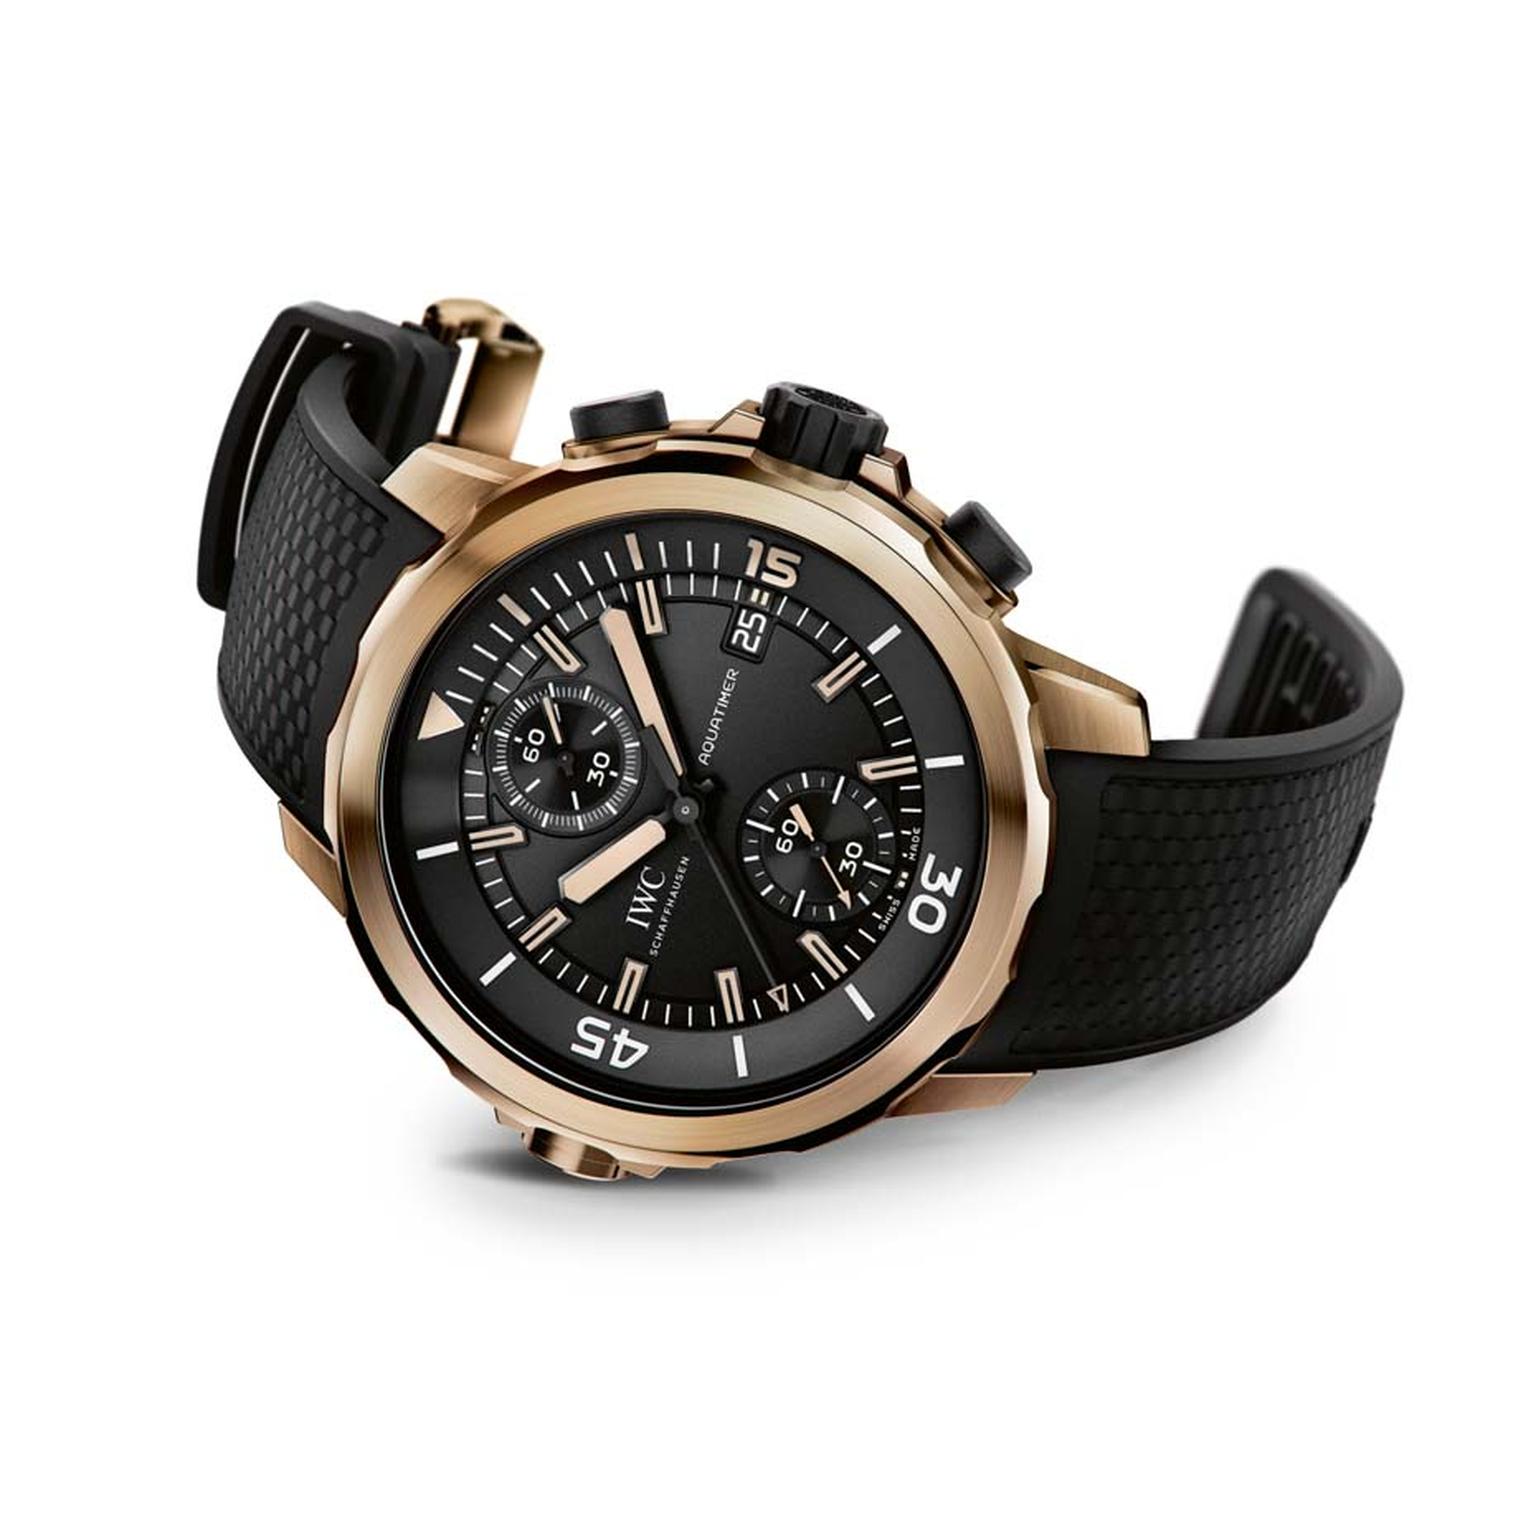 IWC uses bronze for the first time for a watch case in the Aquatimer Expedition Charles Darwin Chronograph Edition, which is dedicated to the Charles Darwin Foundation.